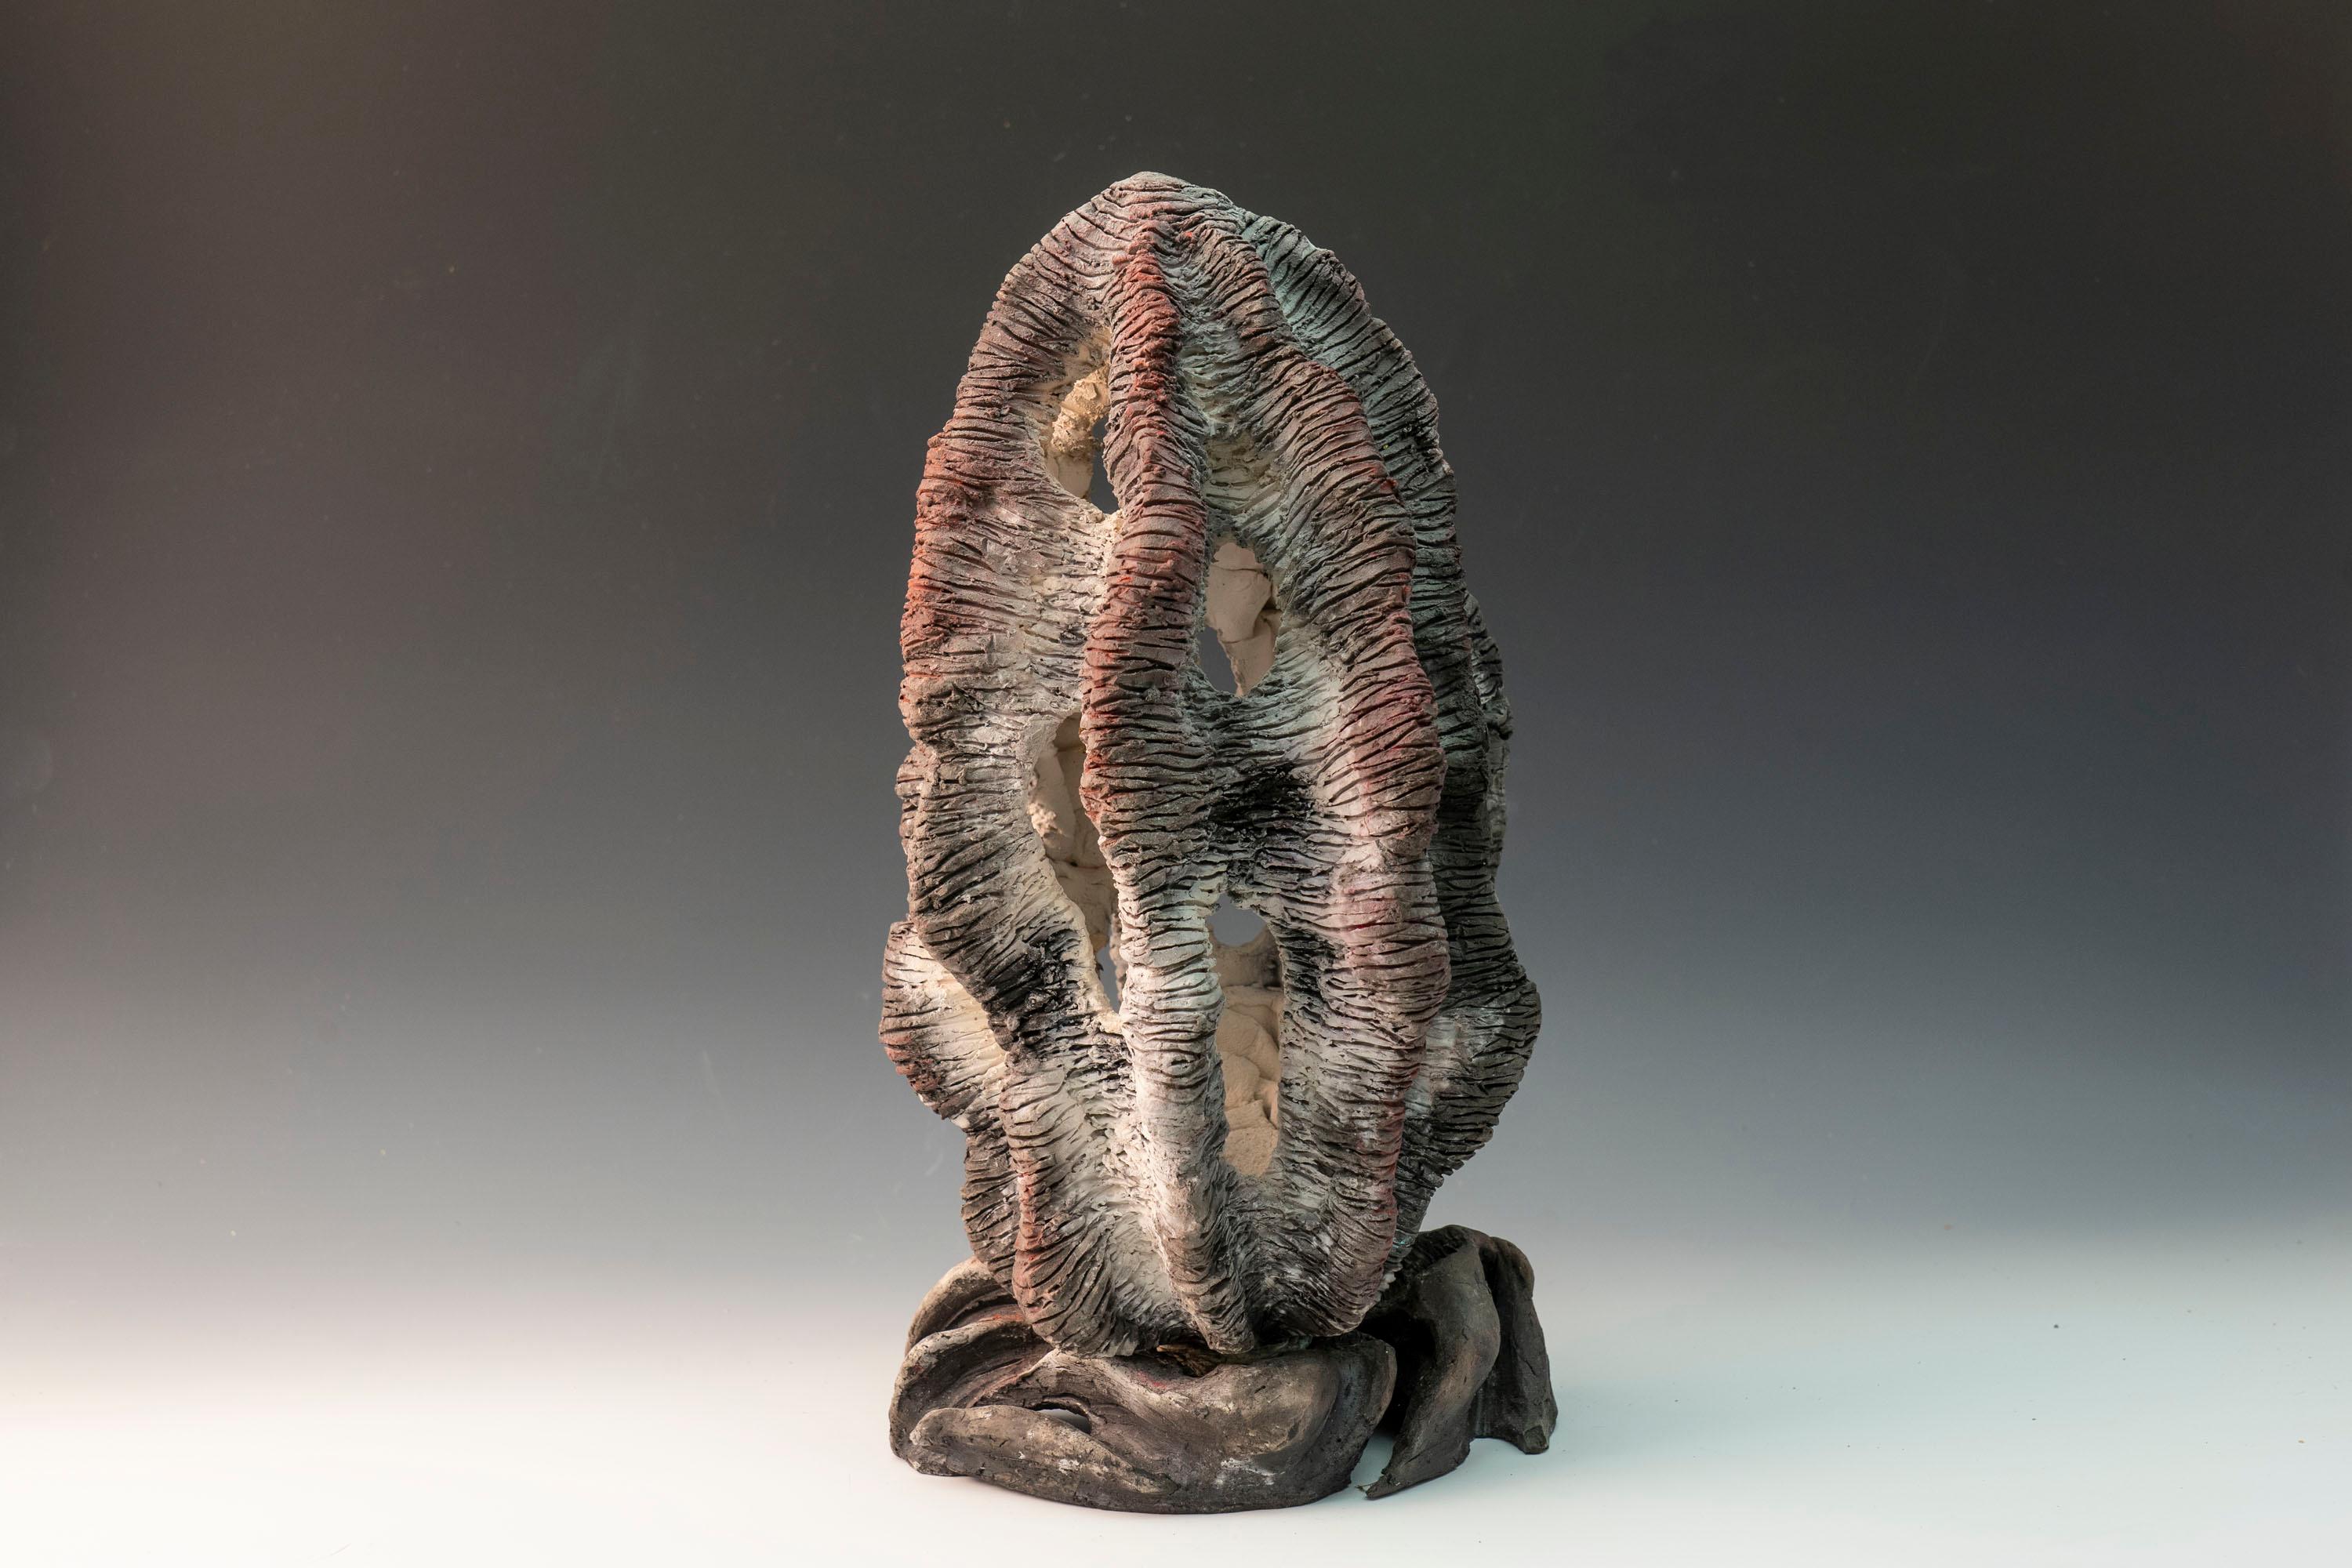 Captured Light, textured ceramic in grays and pinks, embodies the essence of clay in its organic shapes that refer directly to the earth and nature. The artist says 